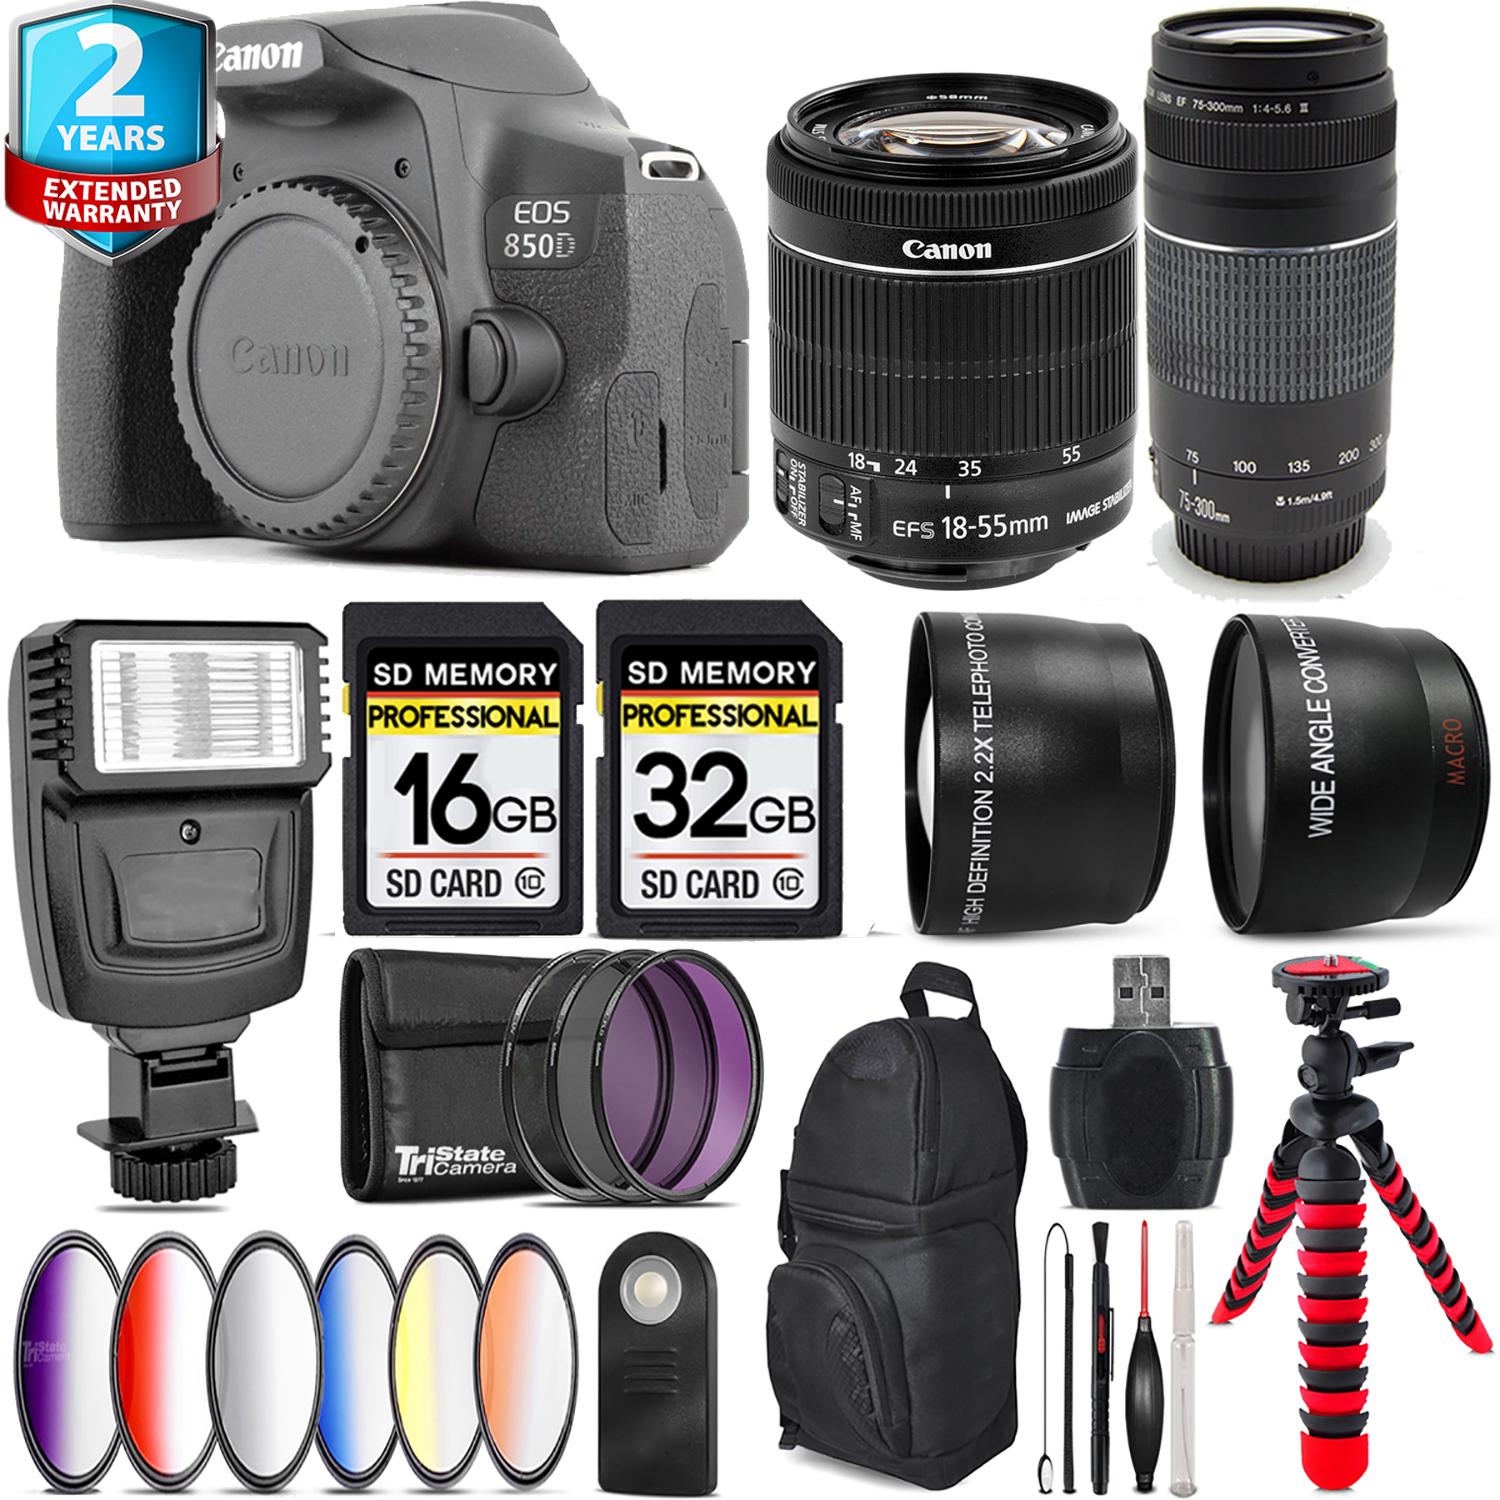 EOS 850D (Rebel T8i) + 18-55mm IS STM + 75- 300mm III + Slave Flash - 48GB Kit *FREE SHIPPING*